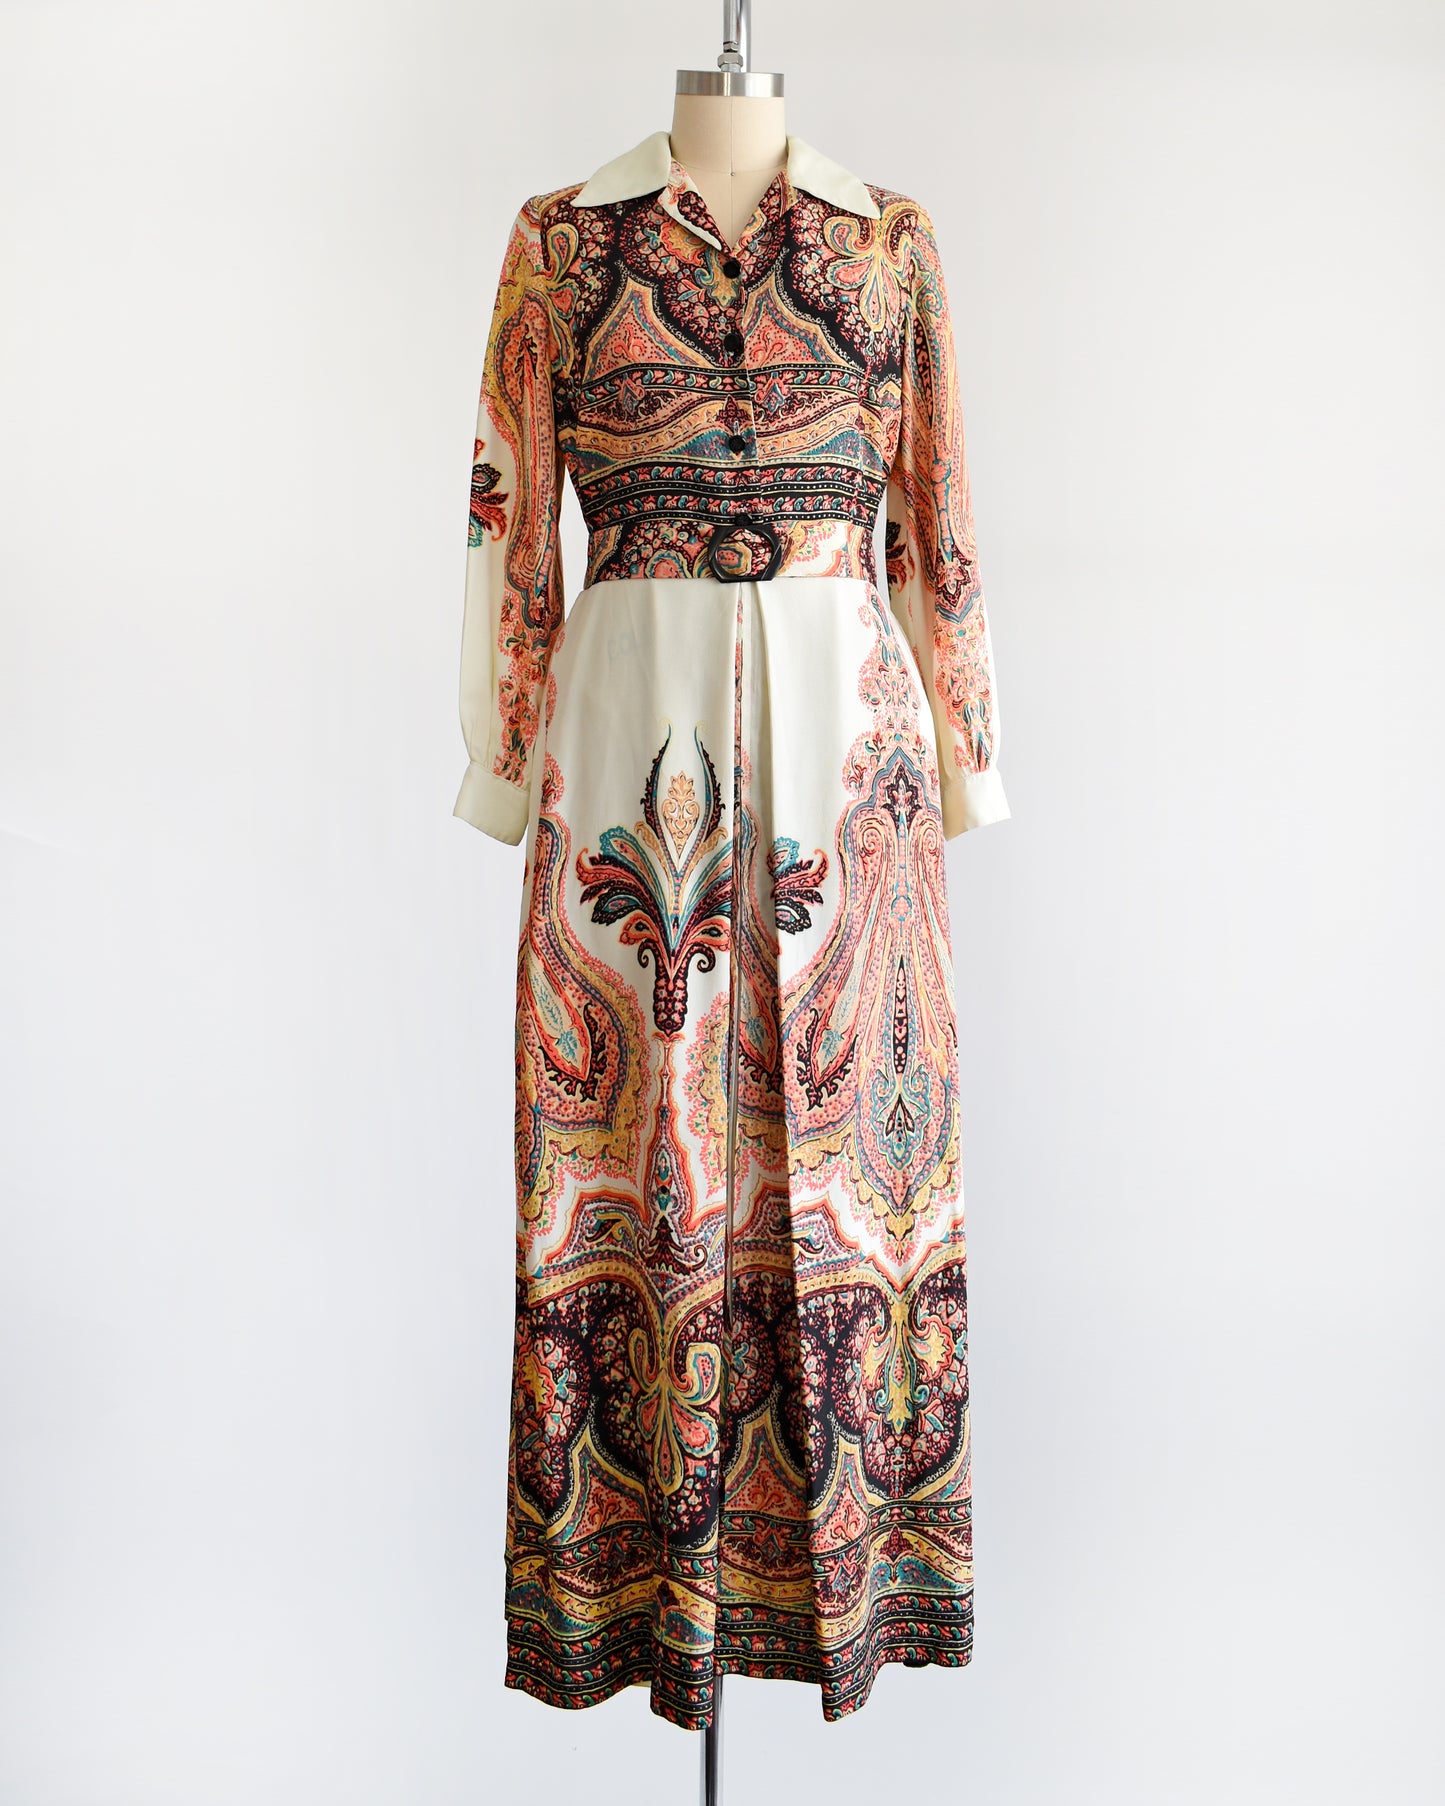 A vintage 1970s psychedelic paisley maxi dress with button front and matching belt that has a black buckle.